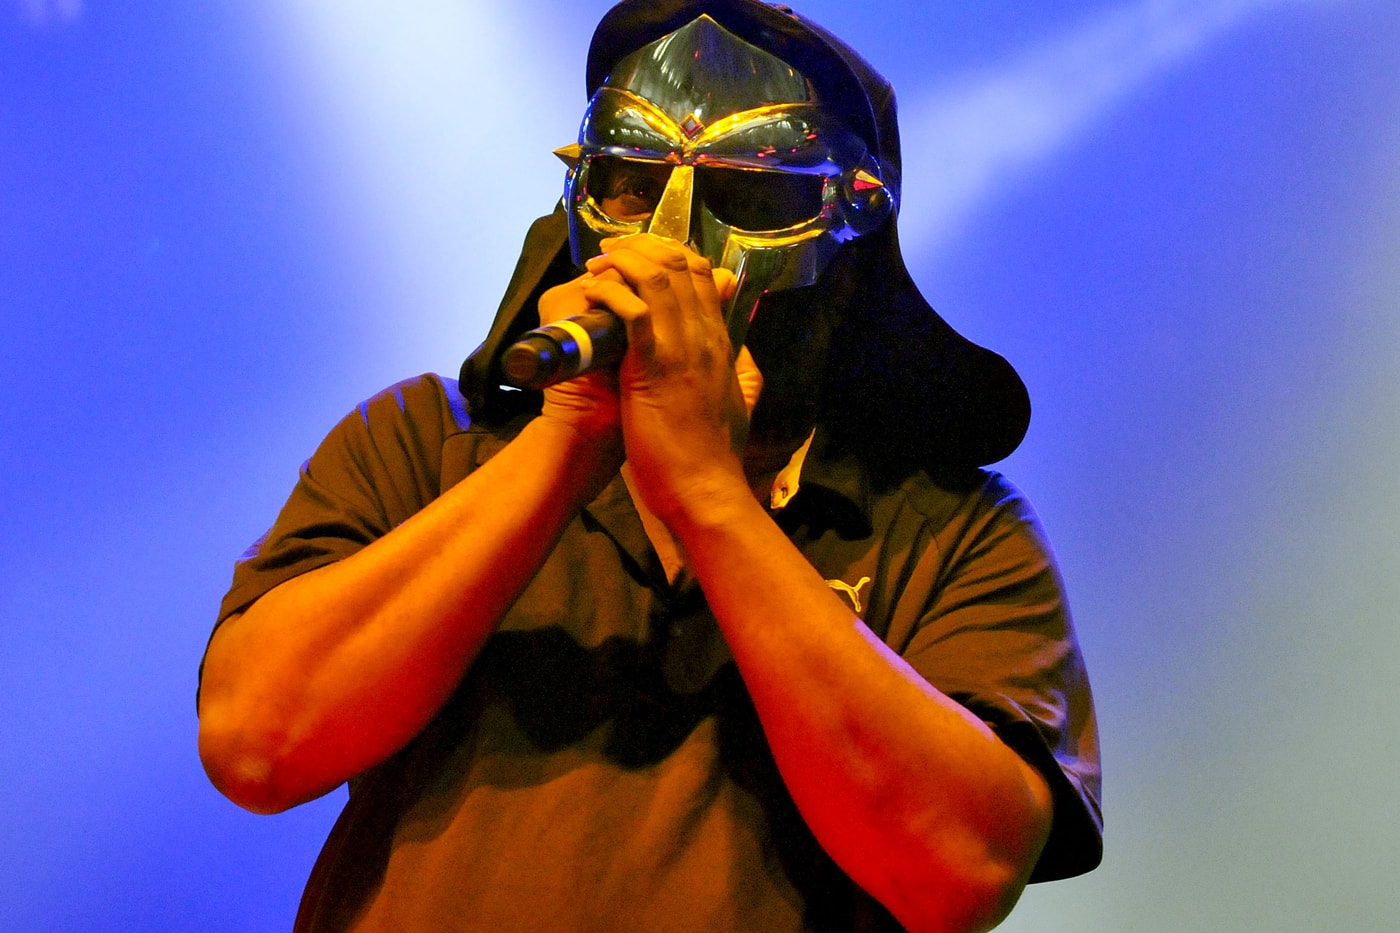 MF DOOM Adult Swim The Missing Notebook Rhymes sean price jay electronica jason demarco 15 Song Series